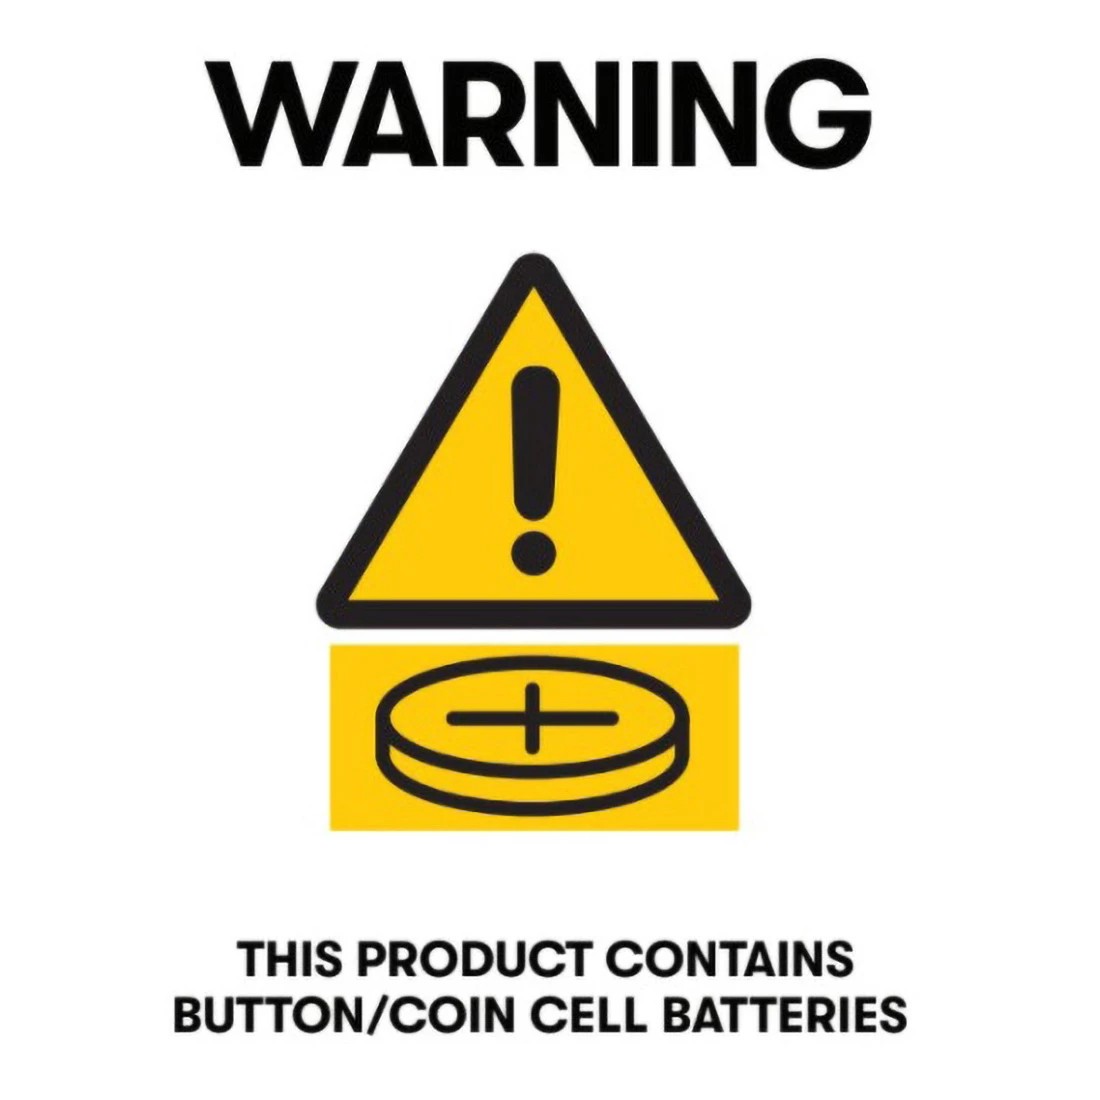 64654232-IMG-Button-Battery-Warning-Label_1